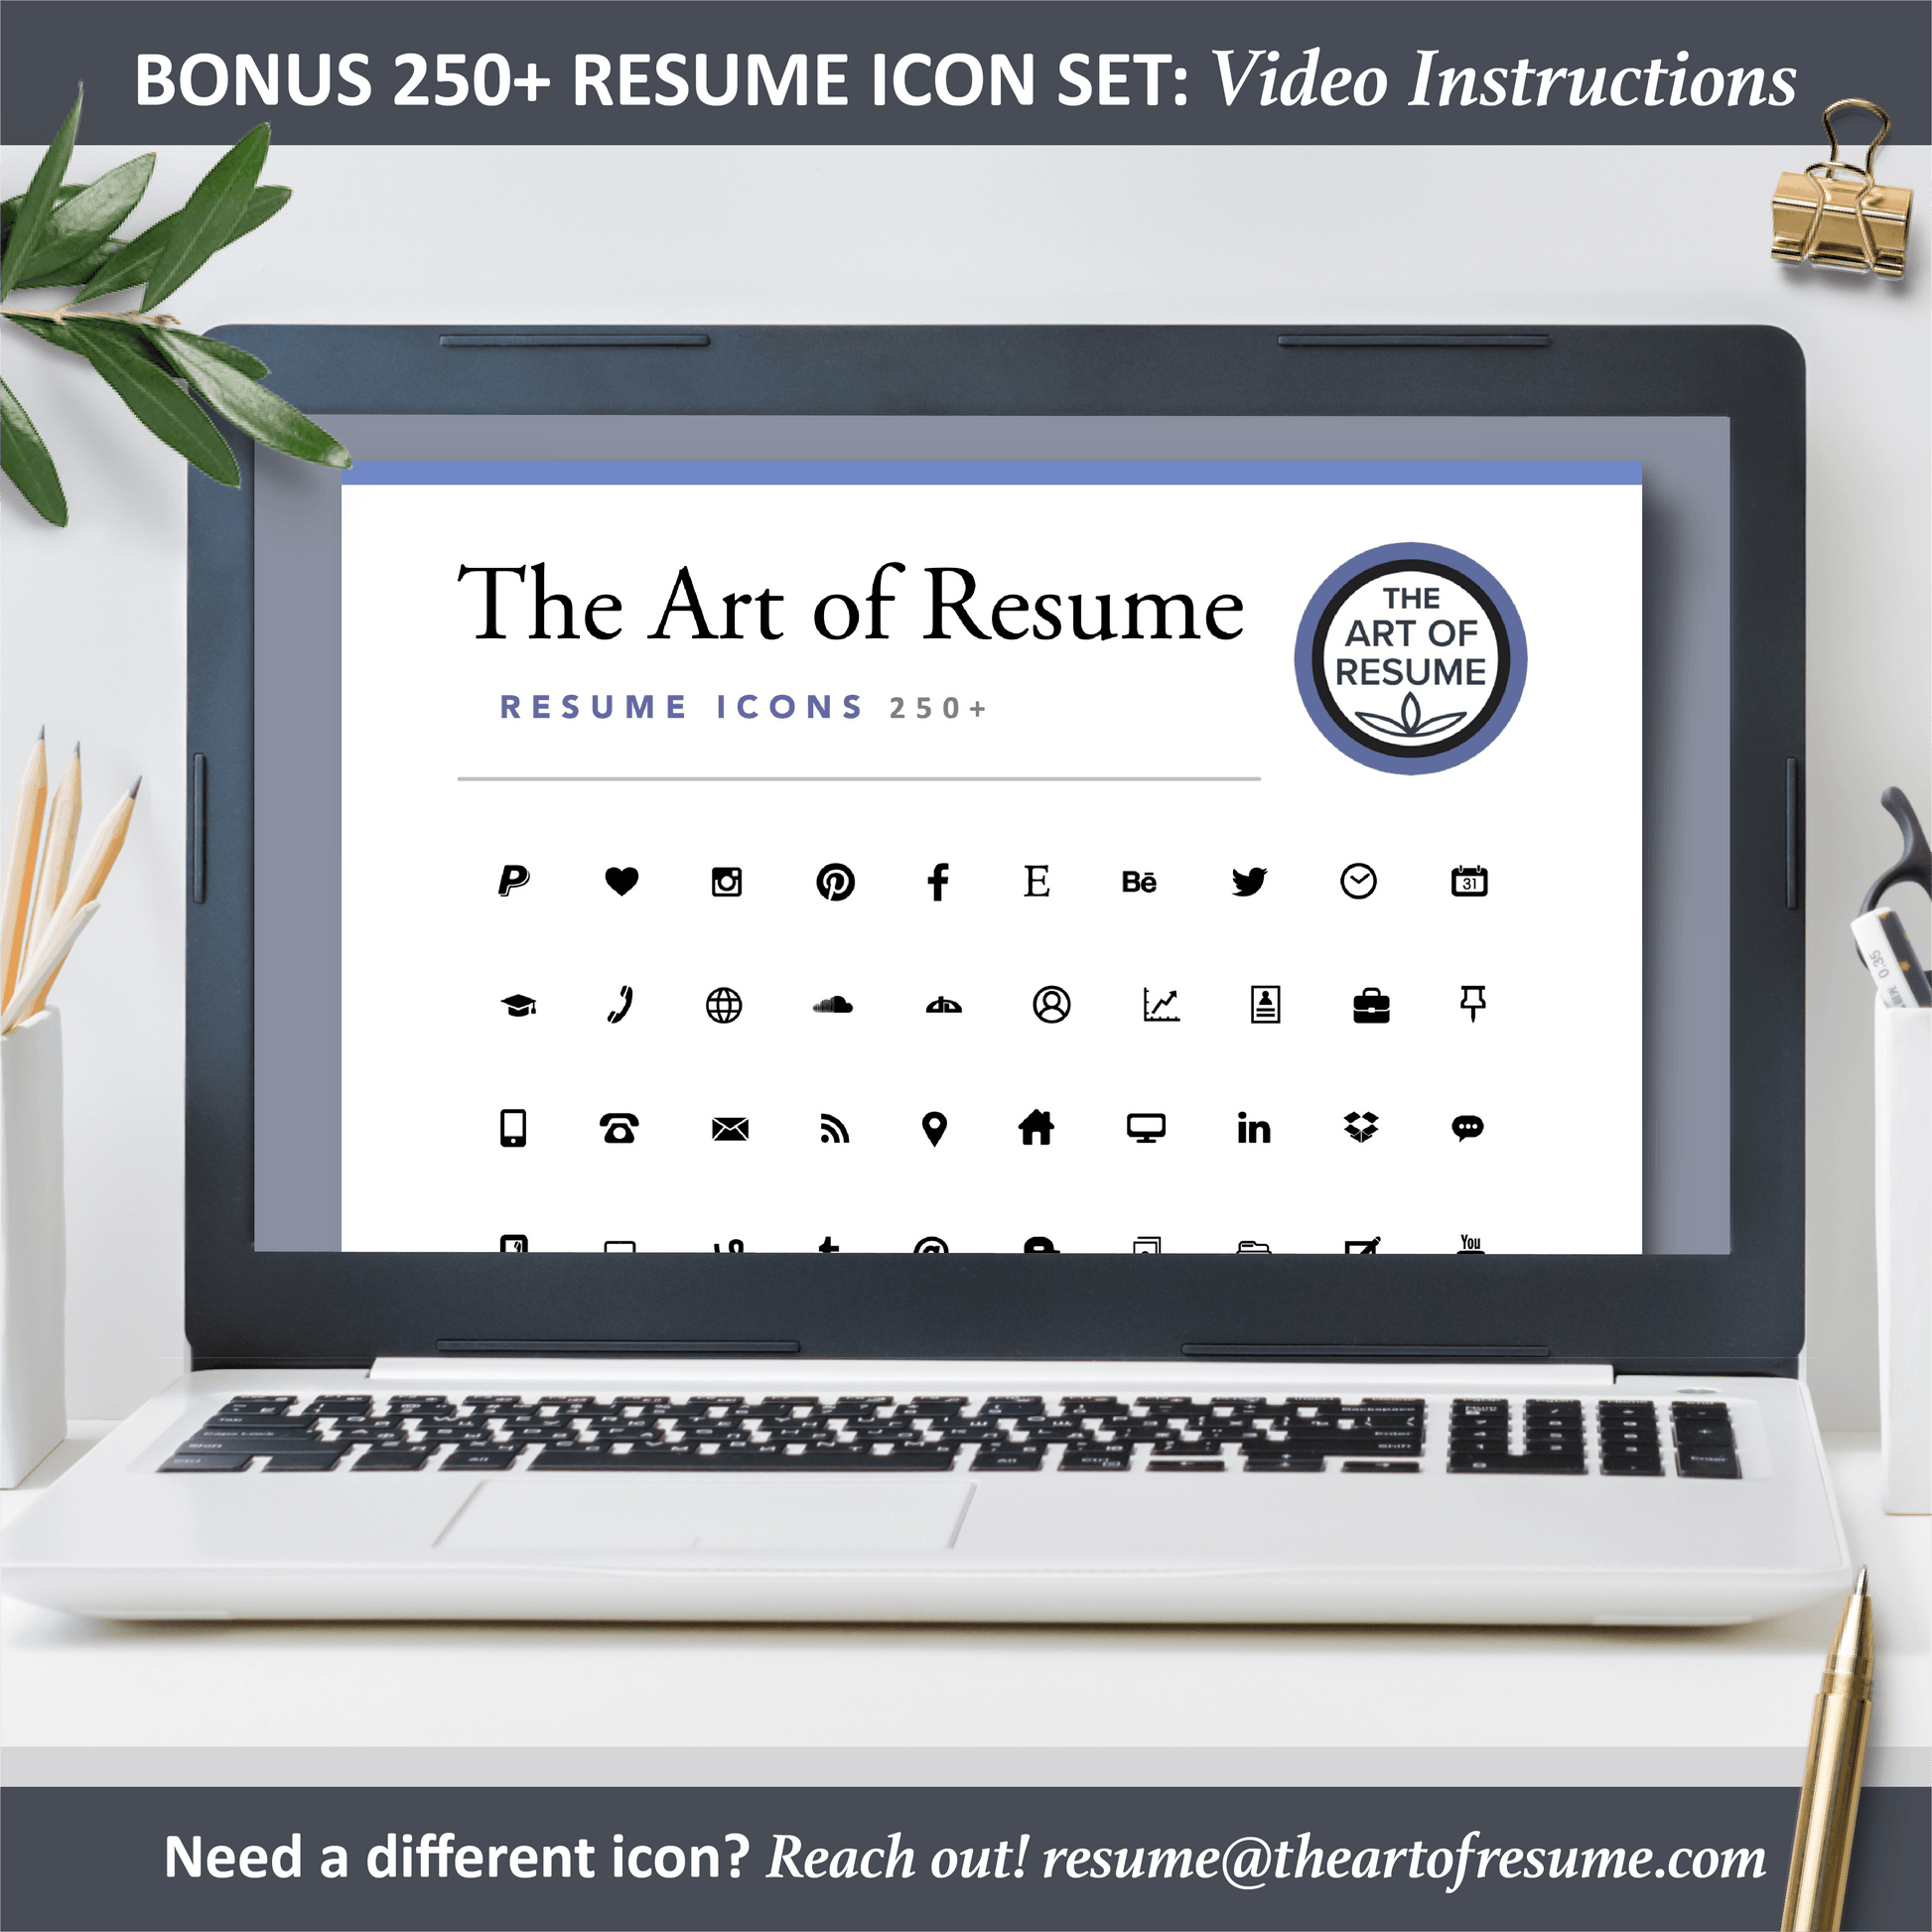 The Art of Resume Templates | Free Resume Icons Included